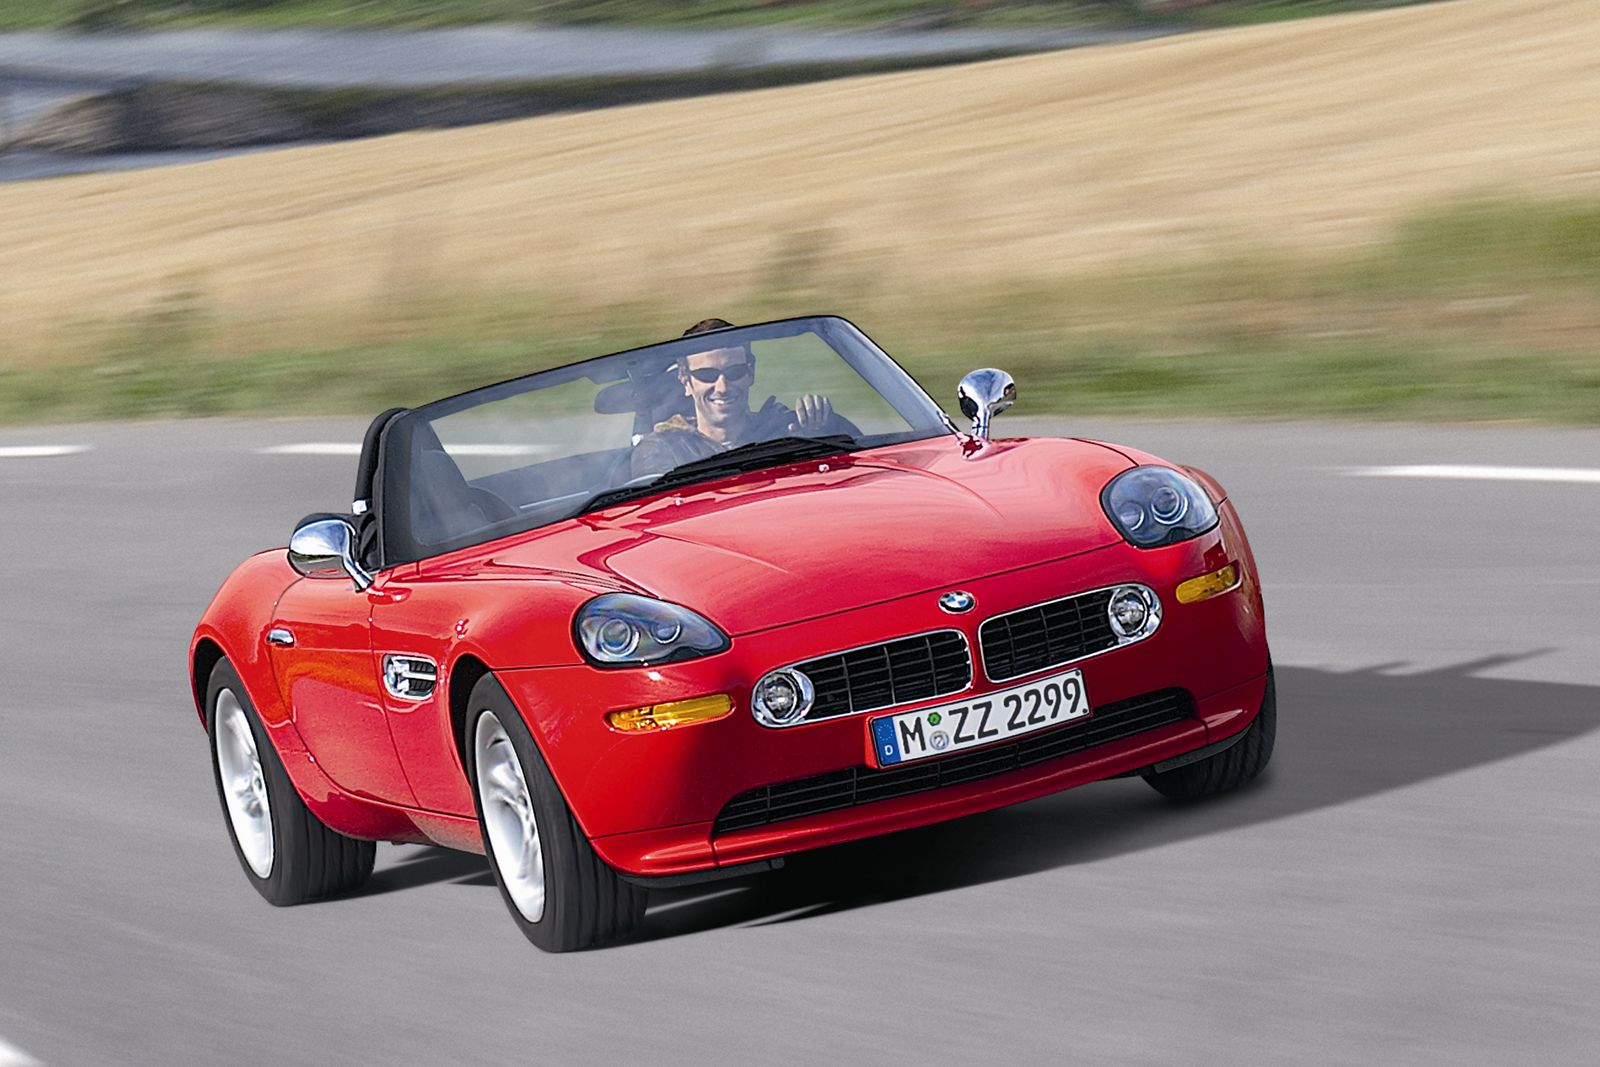 Celebration: 75 years since the first BMW Roadster